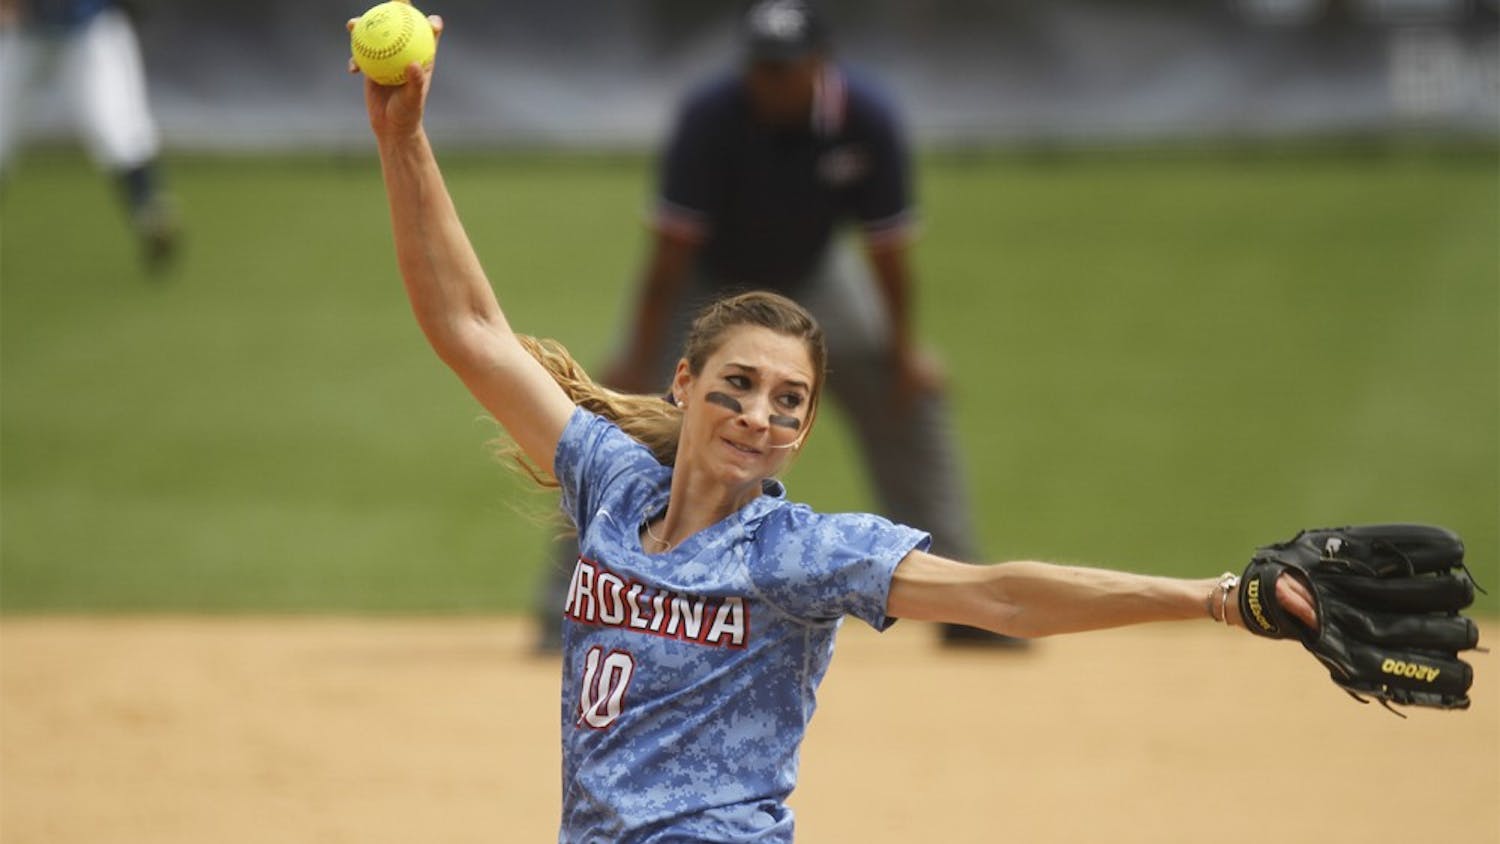 UNC pitcher, Lori Spingola, winds up a pitch against a Maryland opponent.  The Tar Heels defeated the Terps 11-5 in the first game of their double-header Saturday.